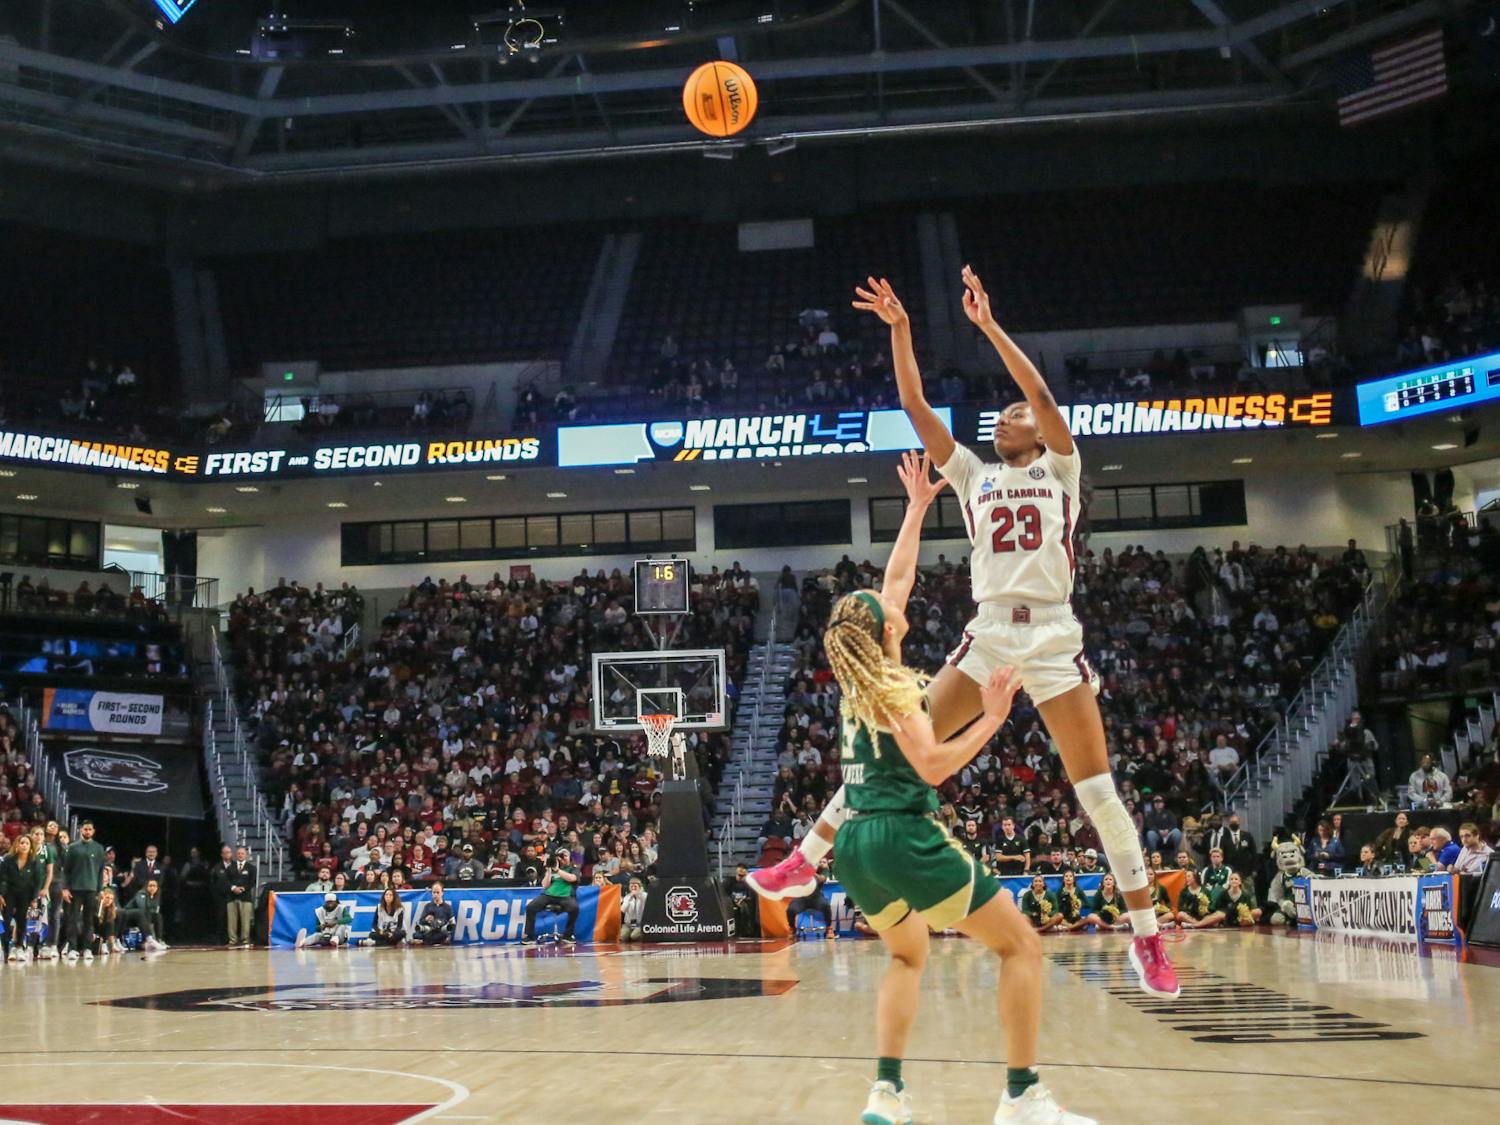 Sophomore guard Bree Hall goes for a jump shot during South Carolina’s game against South Florida in round two of the NCAA tournament at Colonial Life Arena on March 19, 2023. The Gamecocks defeated the Bulls 76-45.